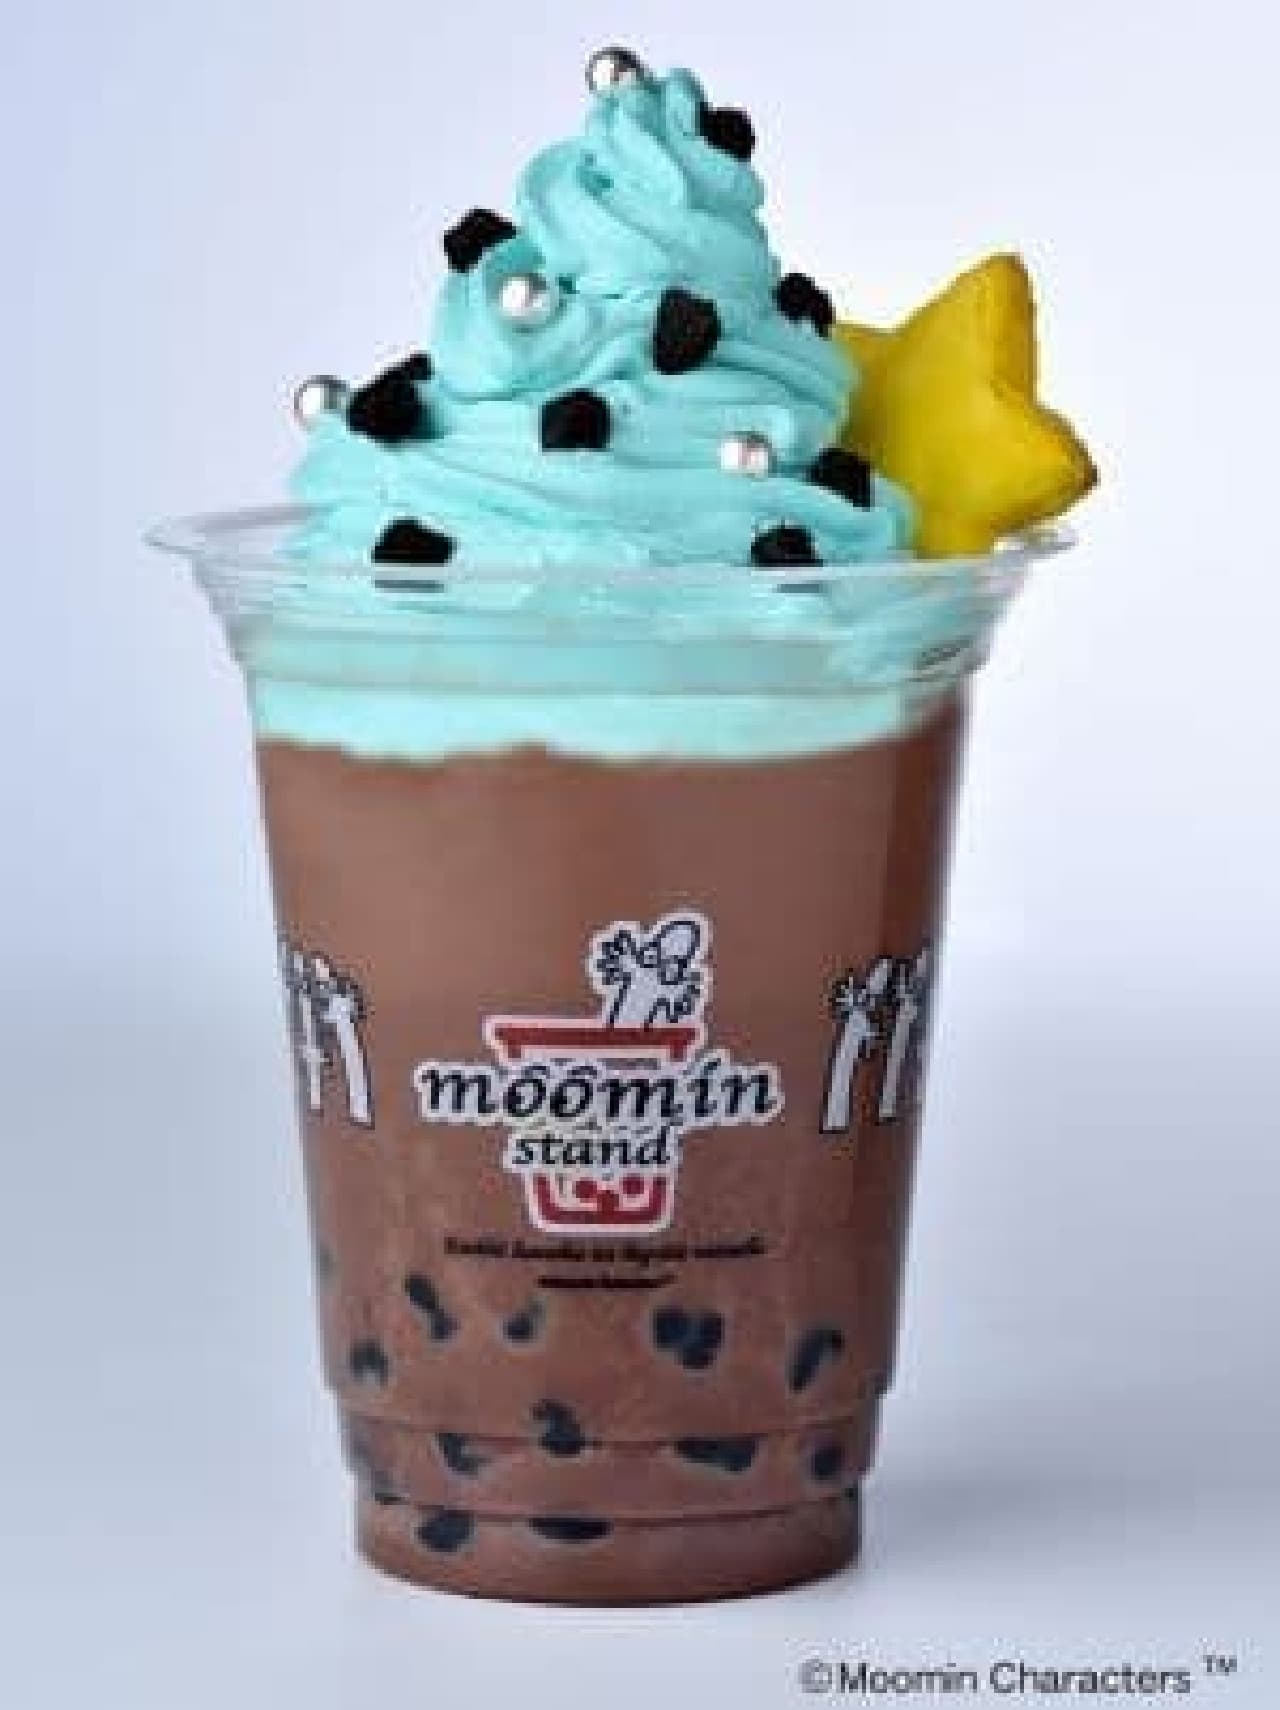 "Chocolate mint cream for a limited time" is a rich chocolate drink full of chocolate chips